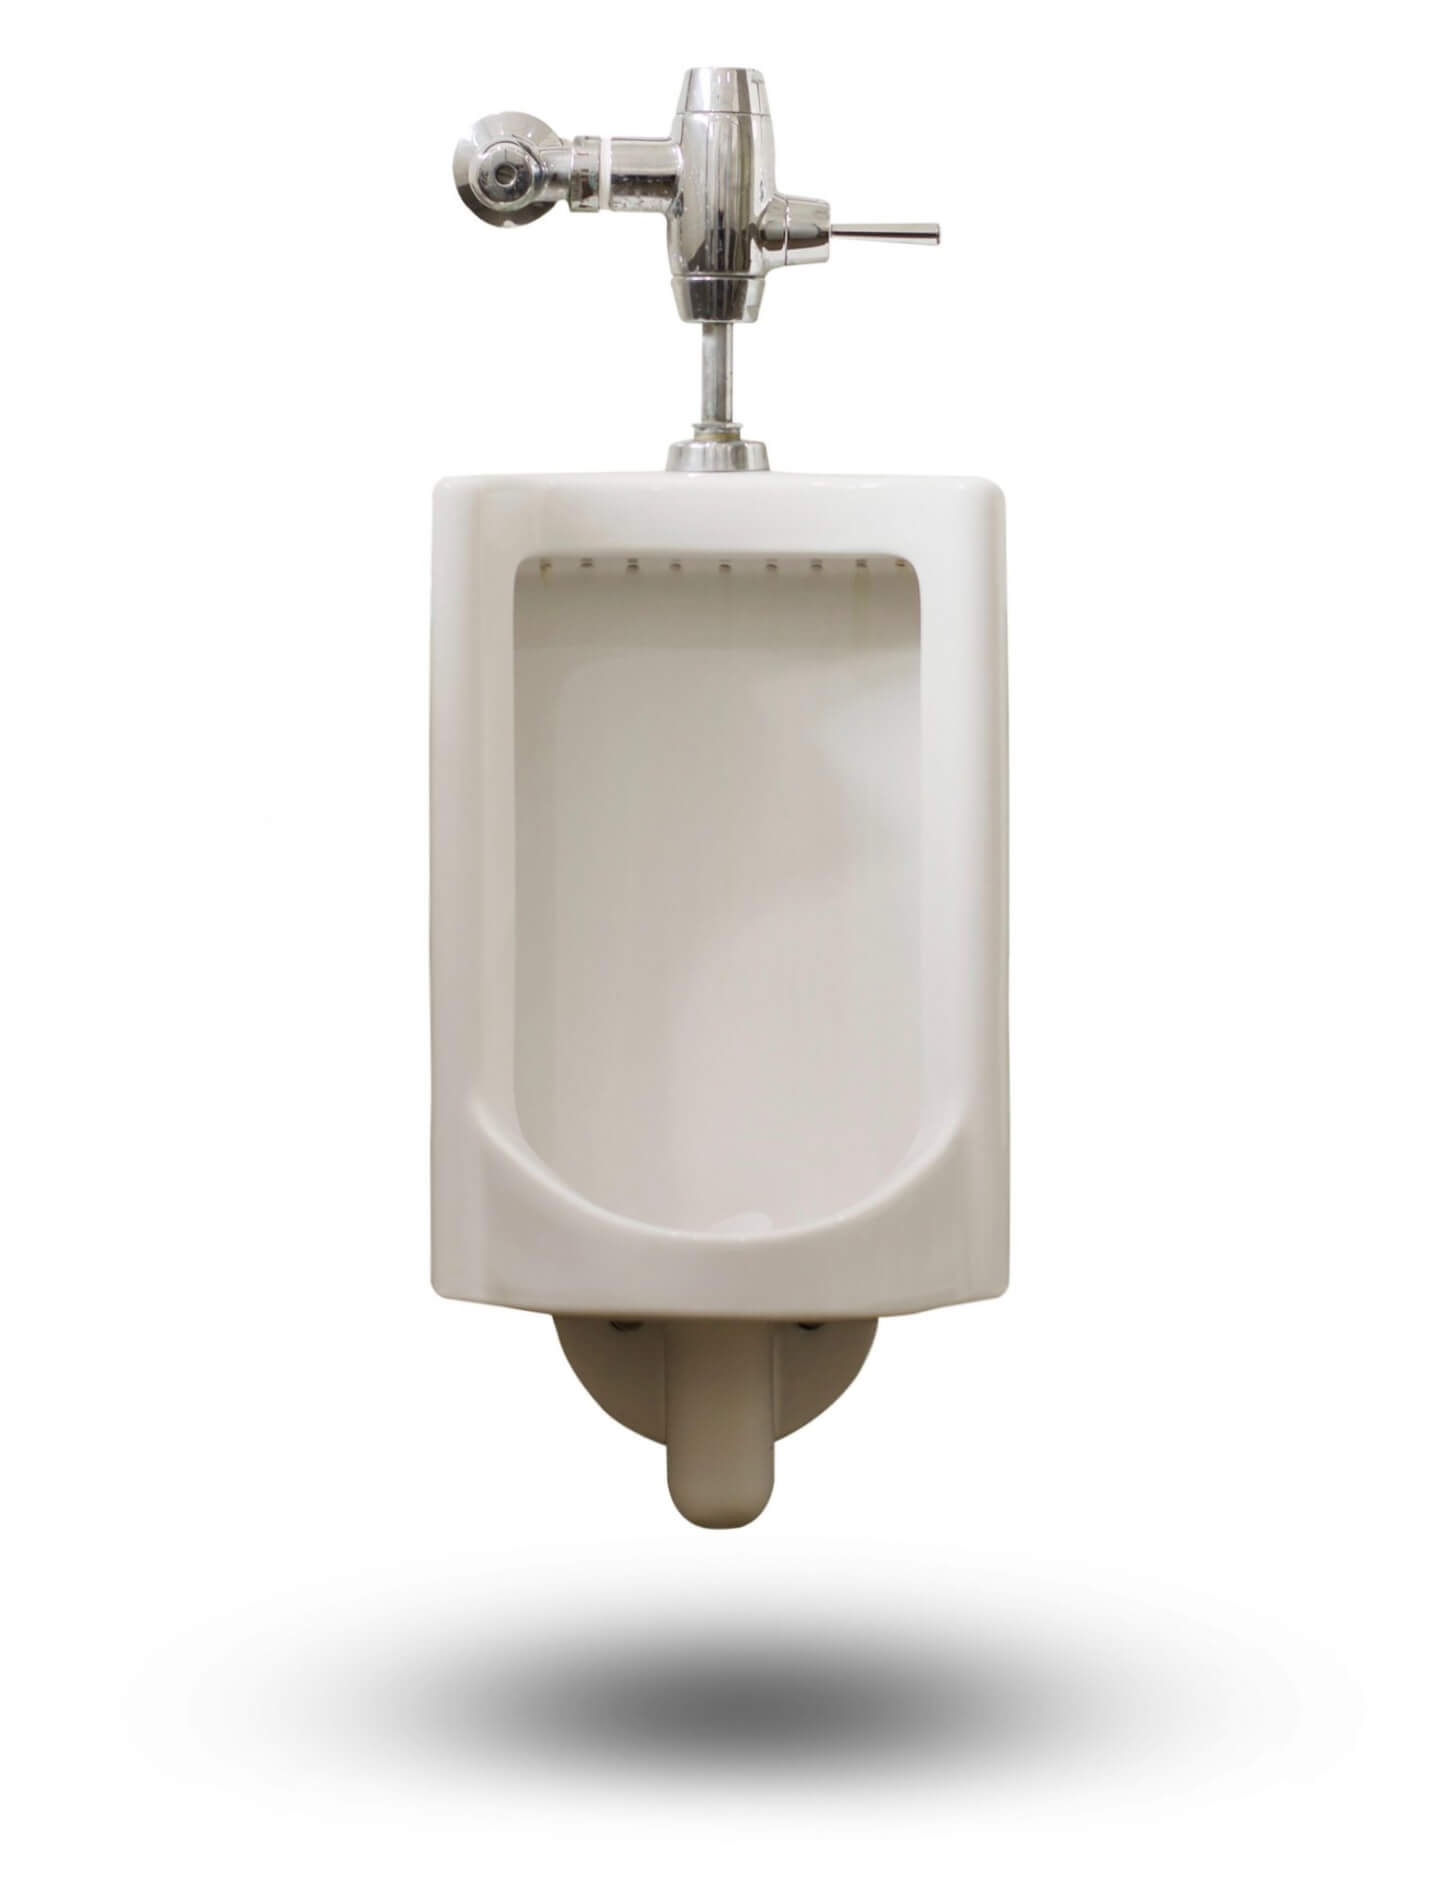 Pittsburgh Commercial Toilet & Urinal Odor Neutralizing System